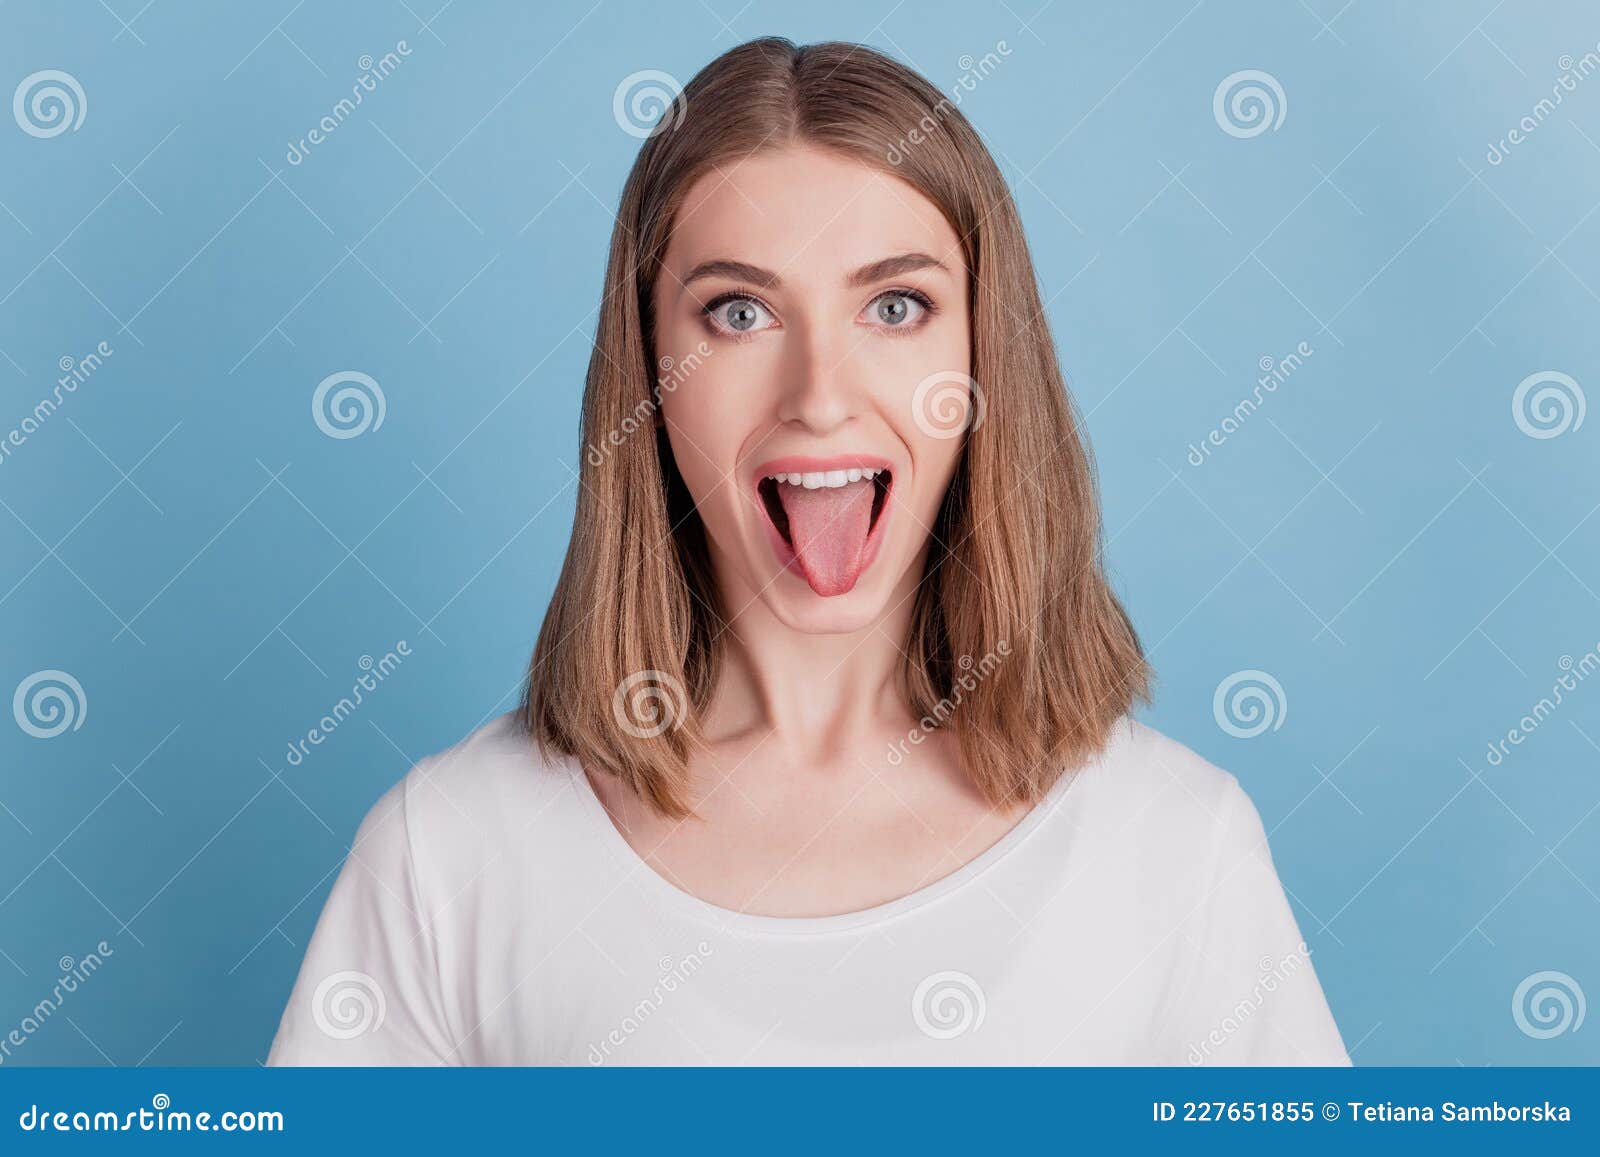 portrait of cheerful healthy girl look camera protrude tongue on blue background